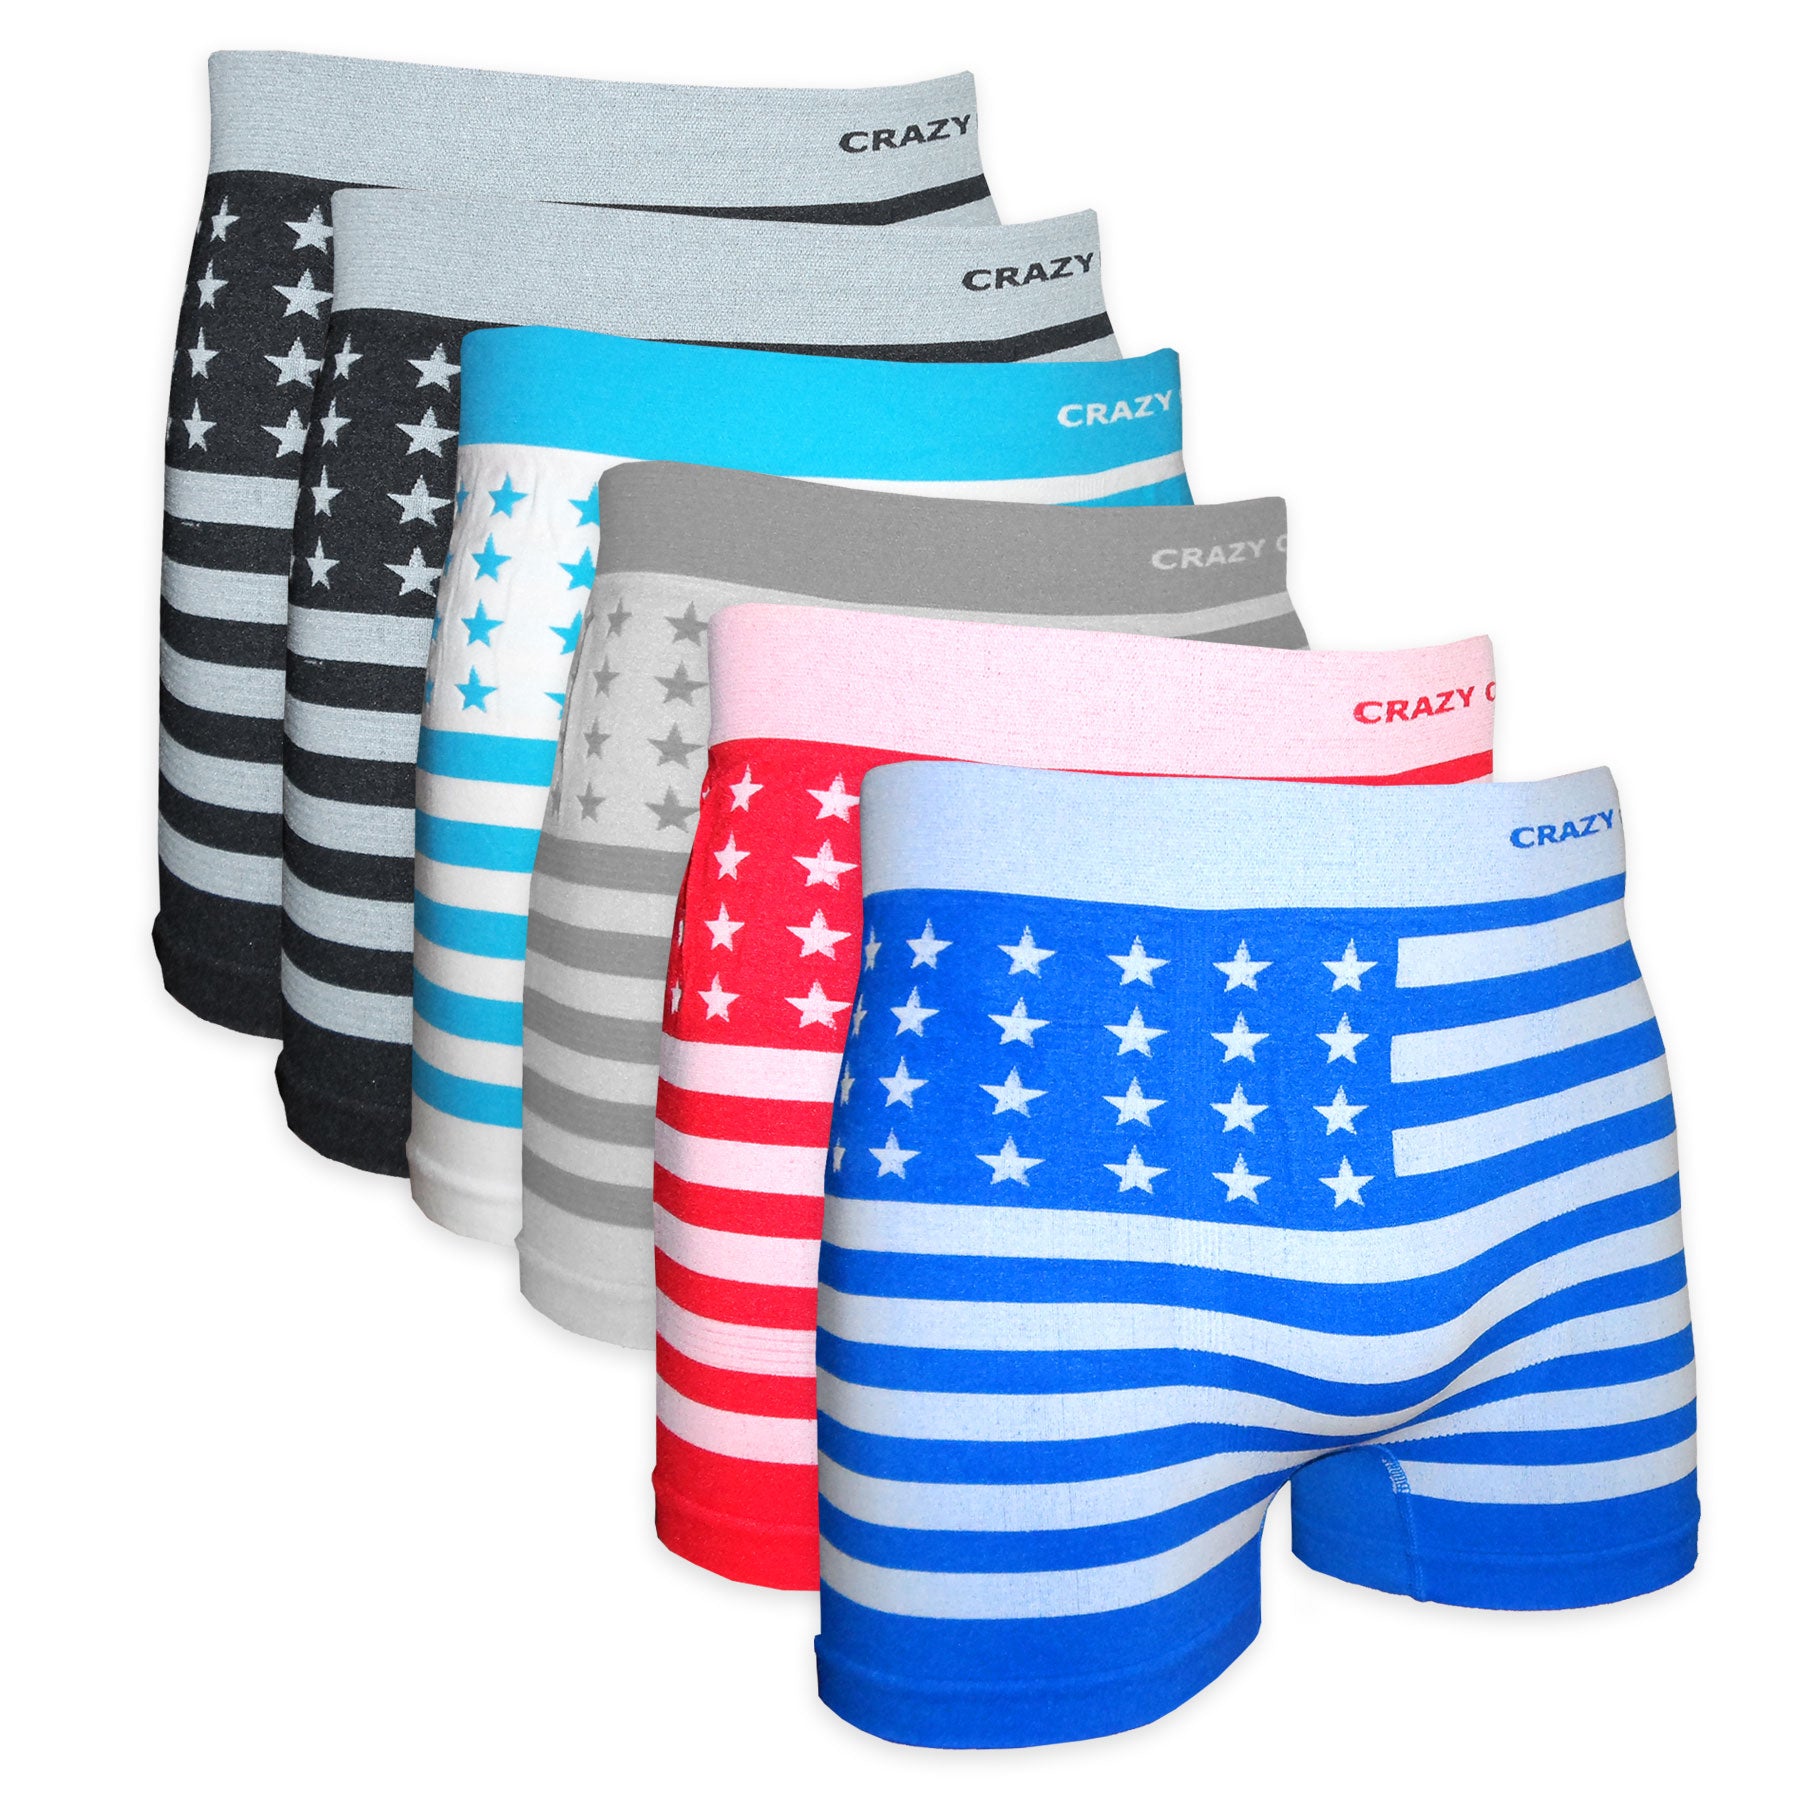 Crazy Boxers American Flag Skyline Boxer Briefs-Large (36-38) 